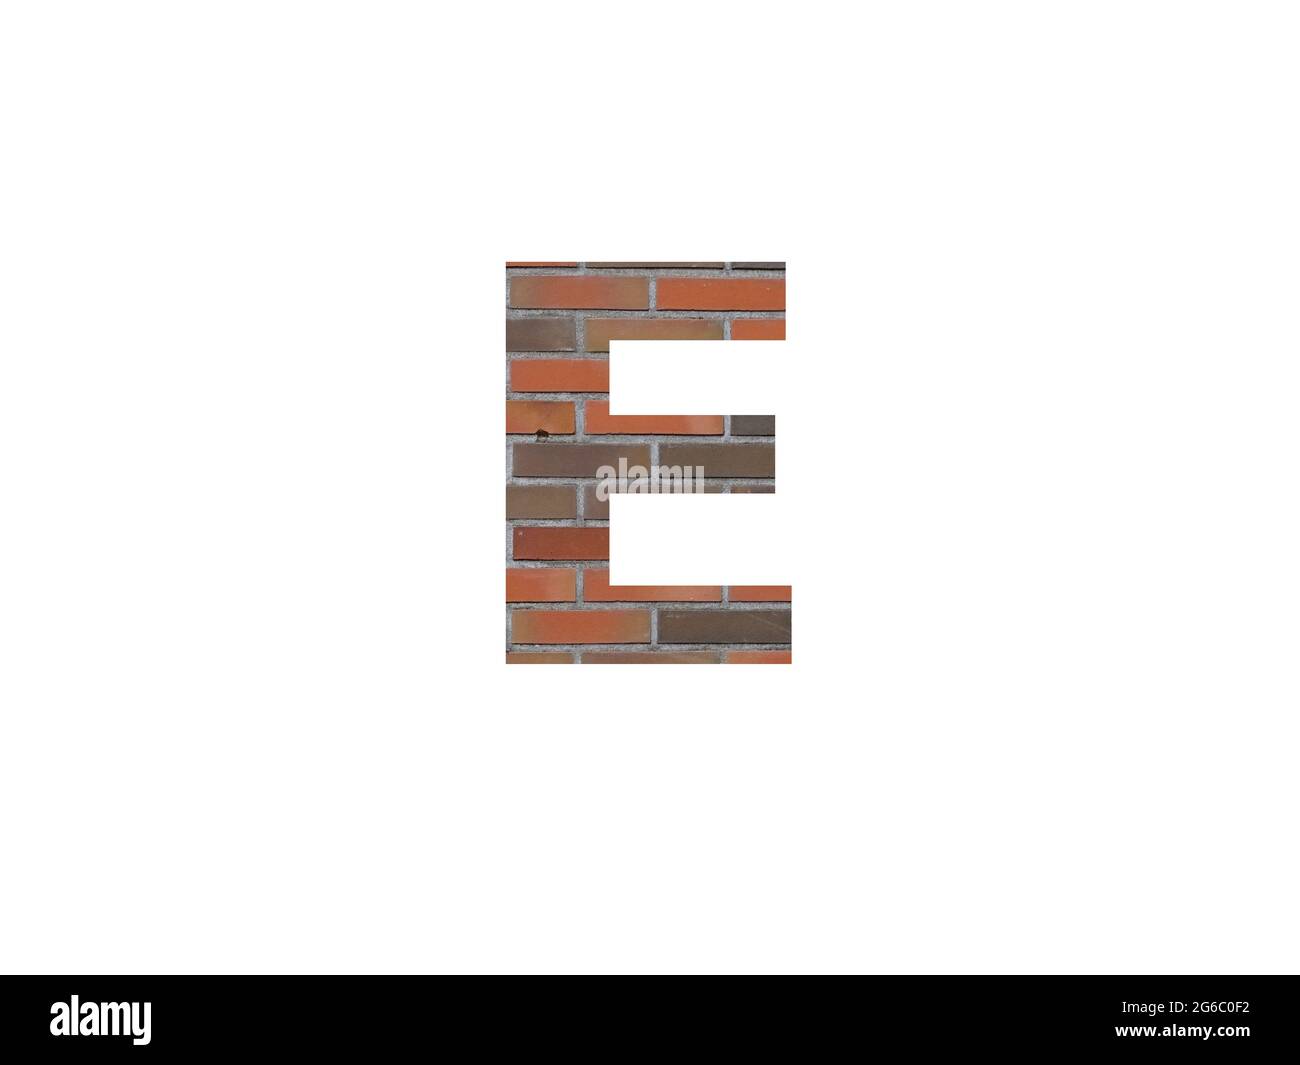 Page 3 - E Logo High Resolution Stock Photography and Images - Alamy